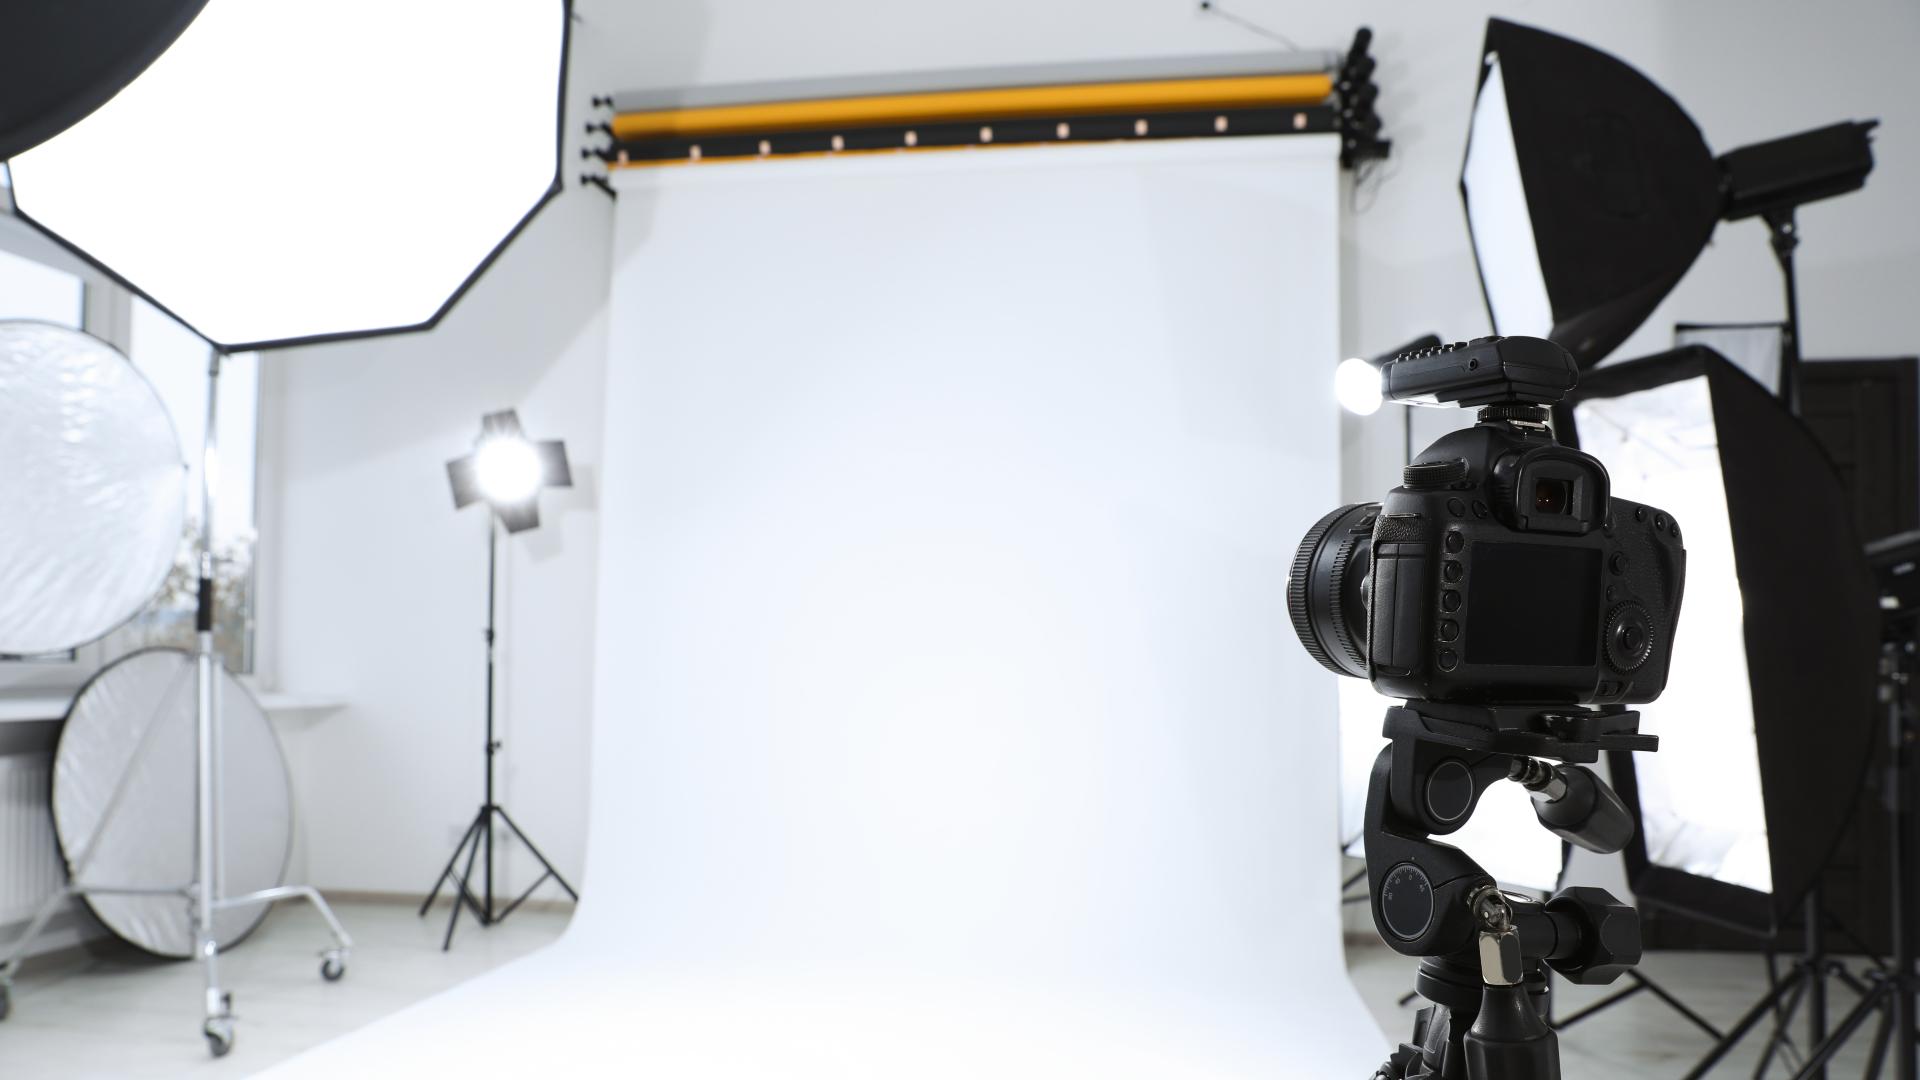 Photography studio with lights, camera, and backdrop